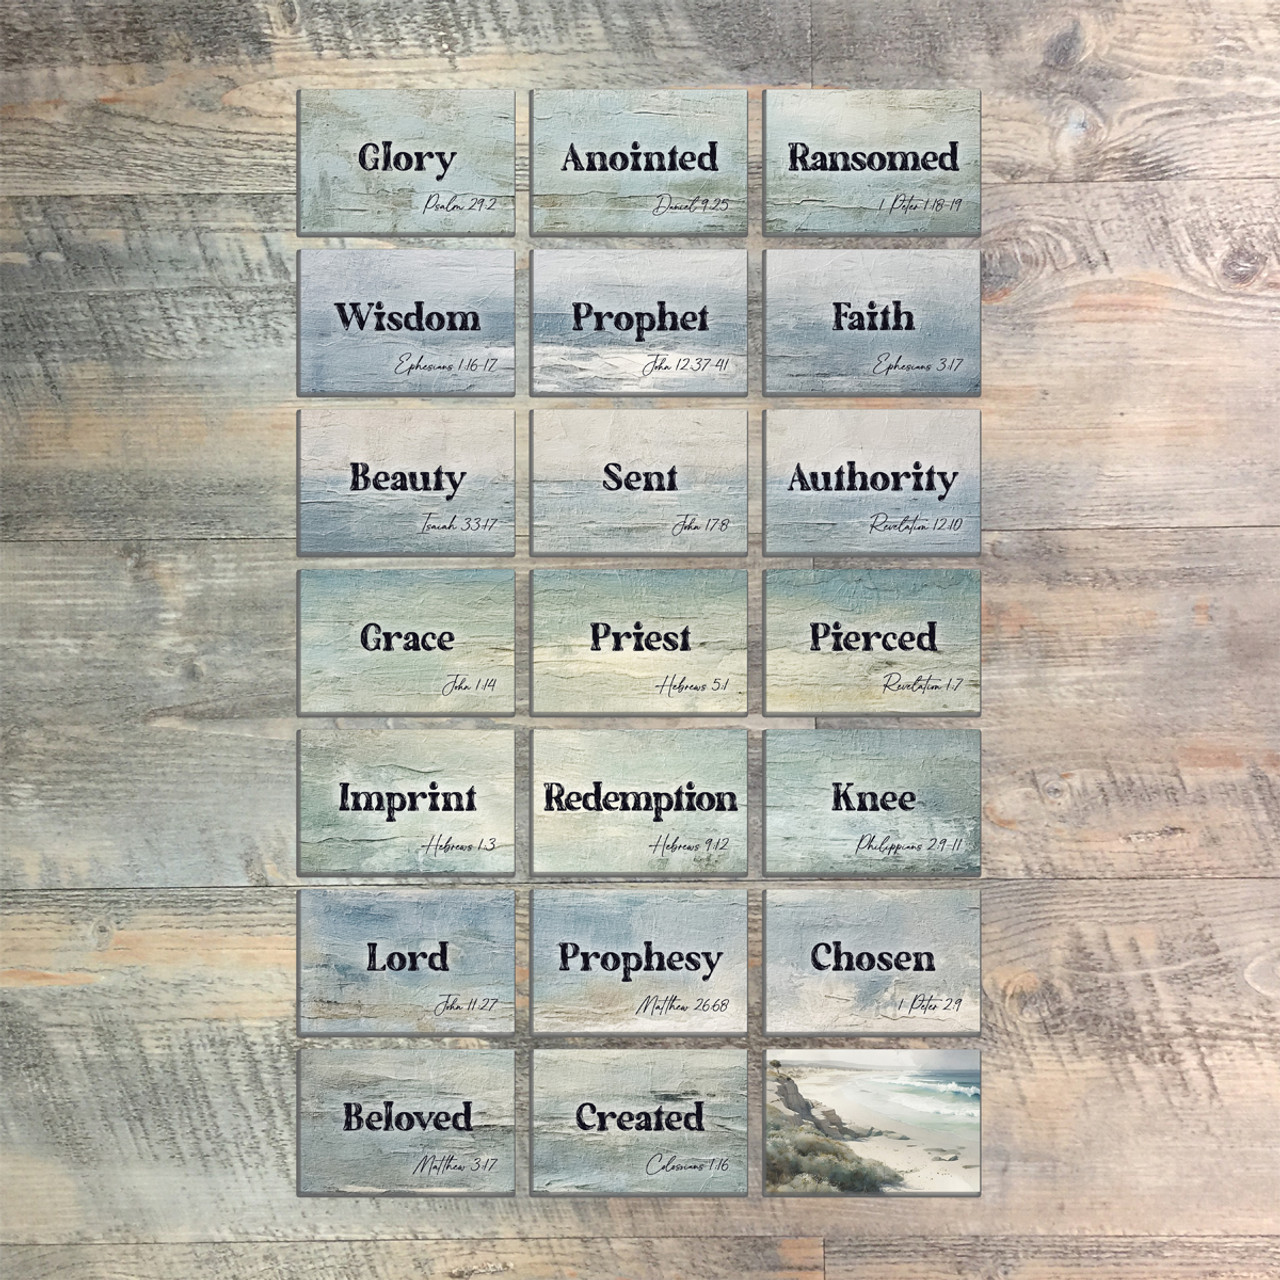 Set 1 Mini Flash Cards for "Behold the Lord" - 20 2x3 Flash Cards  to Match Kit